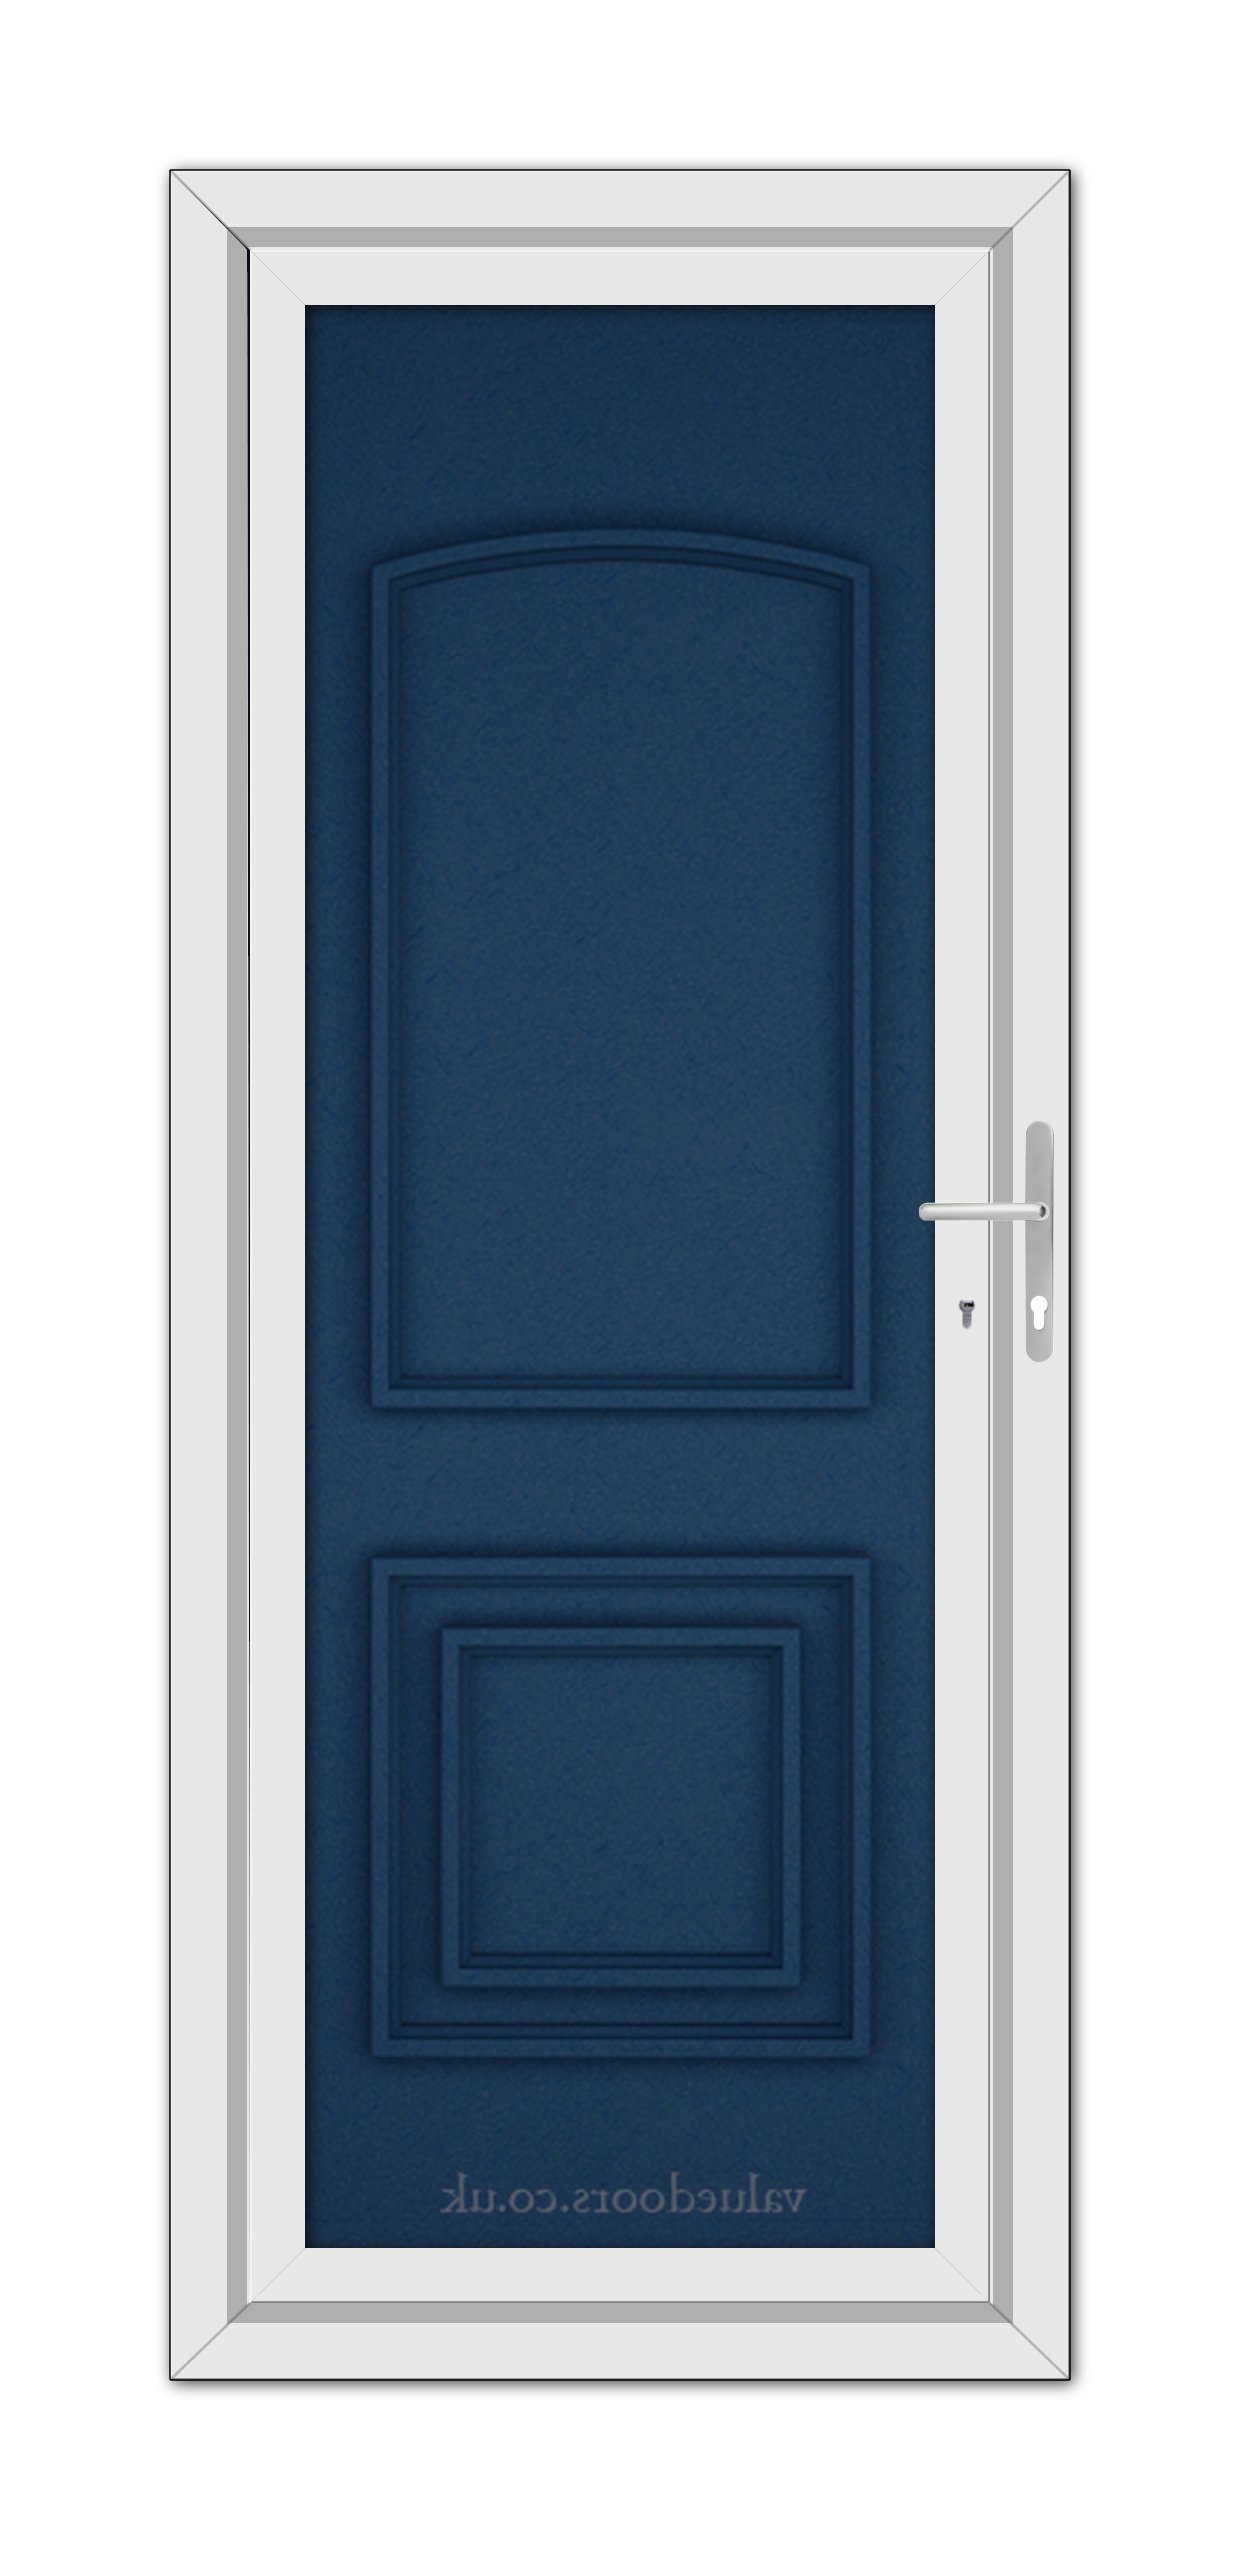 A vertical image of a closed Blue Balmoral Classic Solid uPVC Door set within a white frame, featuring a rectangular panel design and a modern metal handle on the right side.